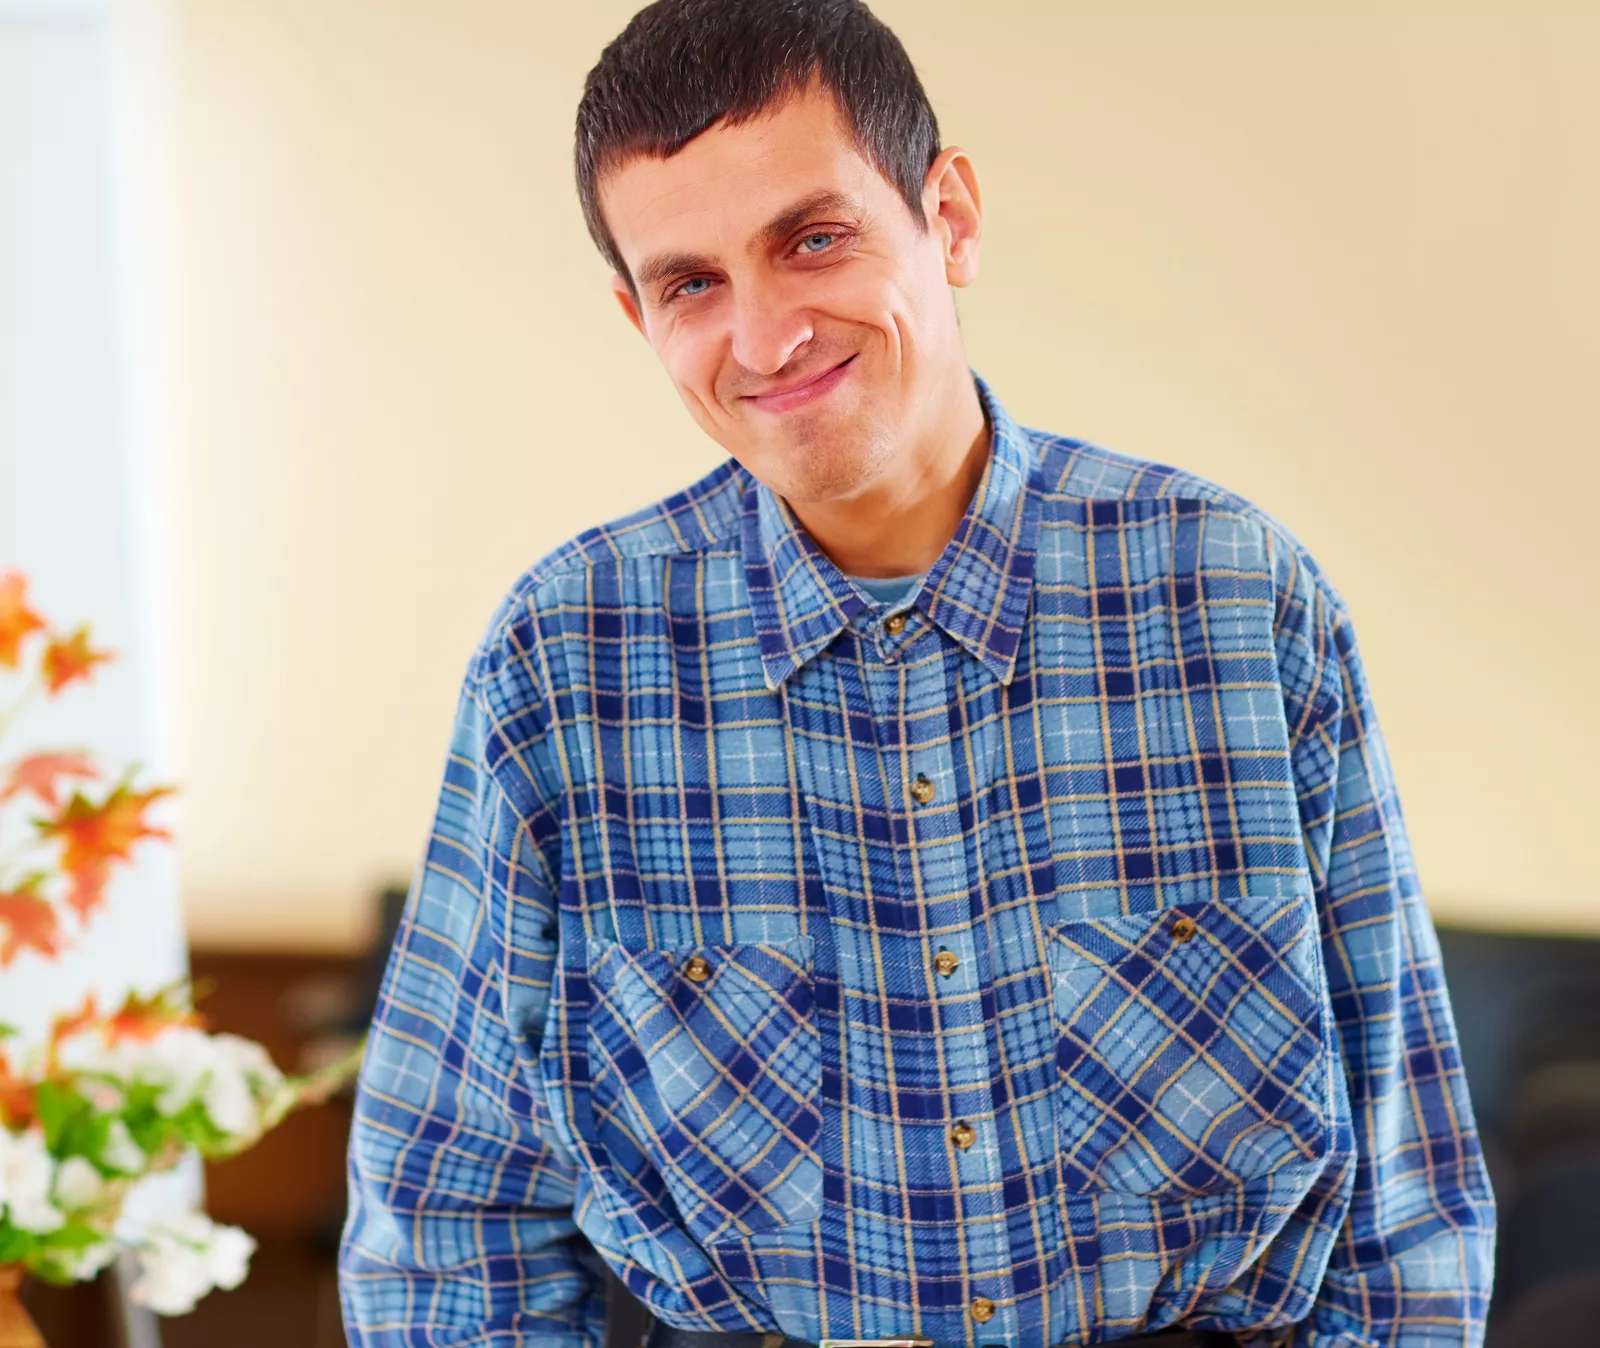 Strategies For Working With Adults With Developmental Disabilities